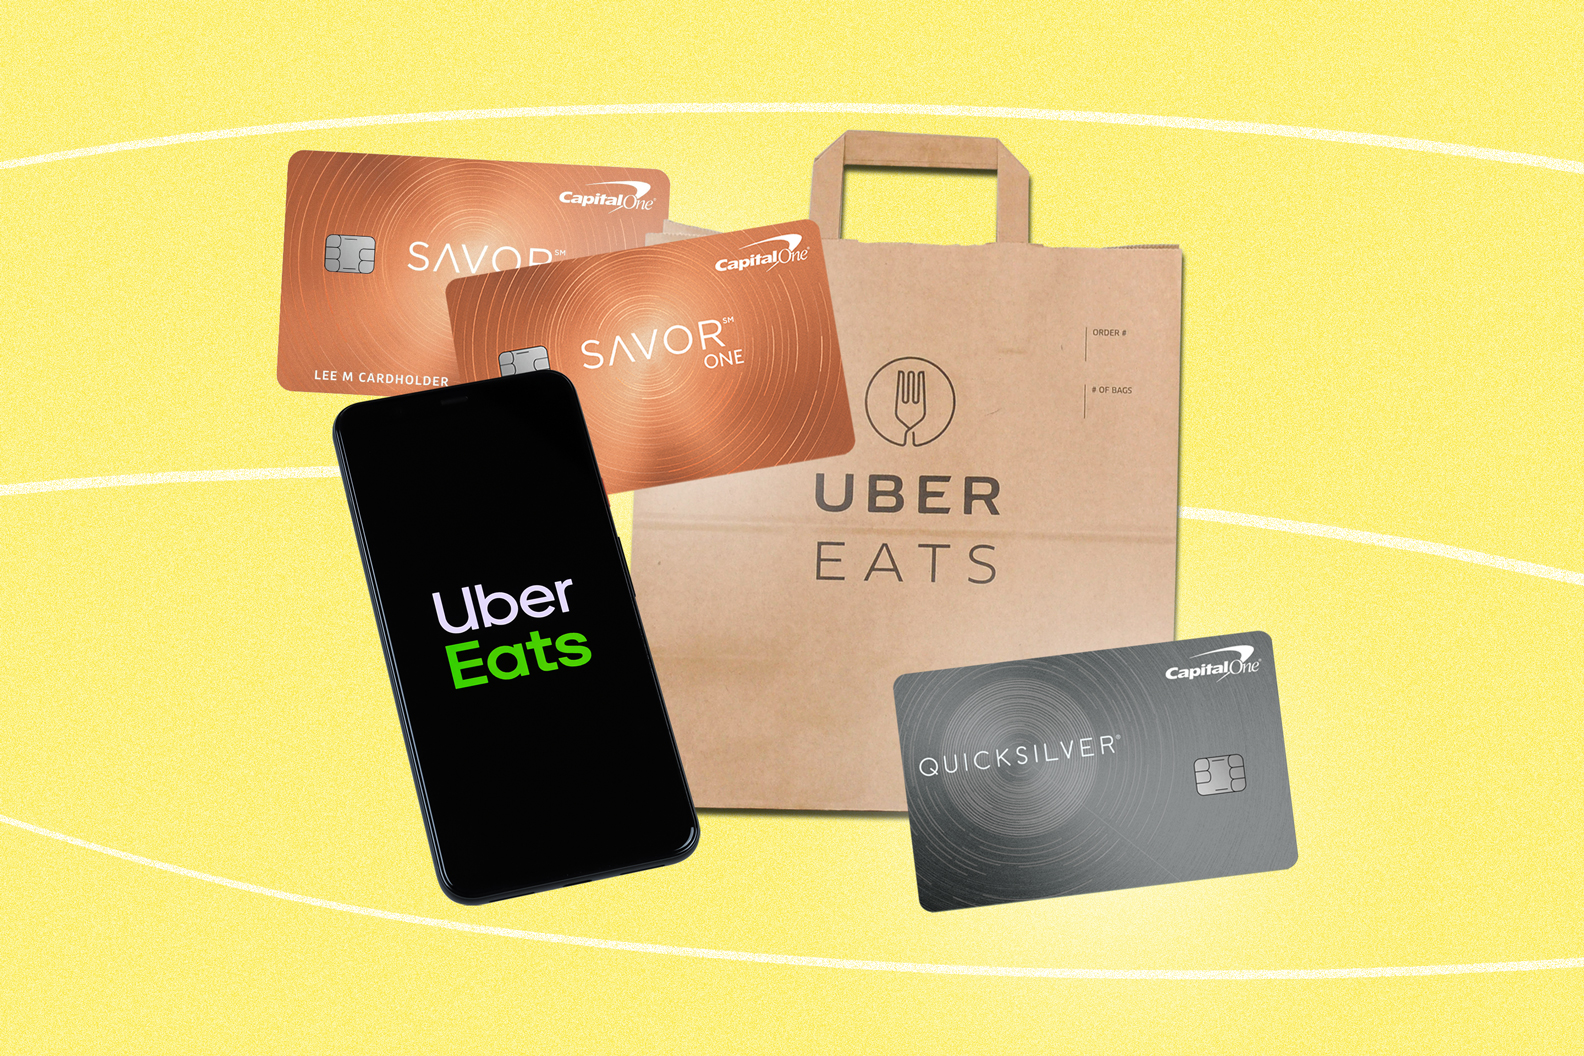 These Credit Cards Just Started Offering 10% Cash Back on Uber and Uber Eats